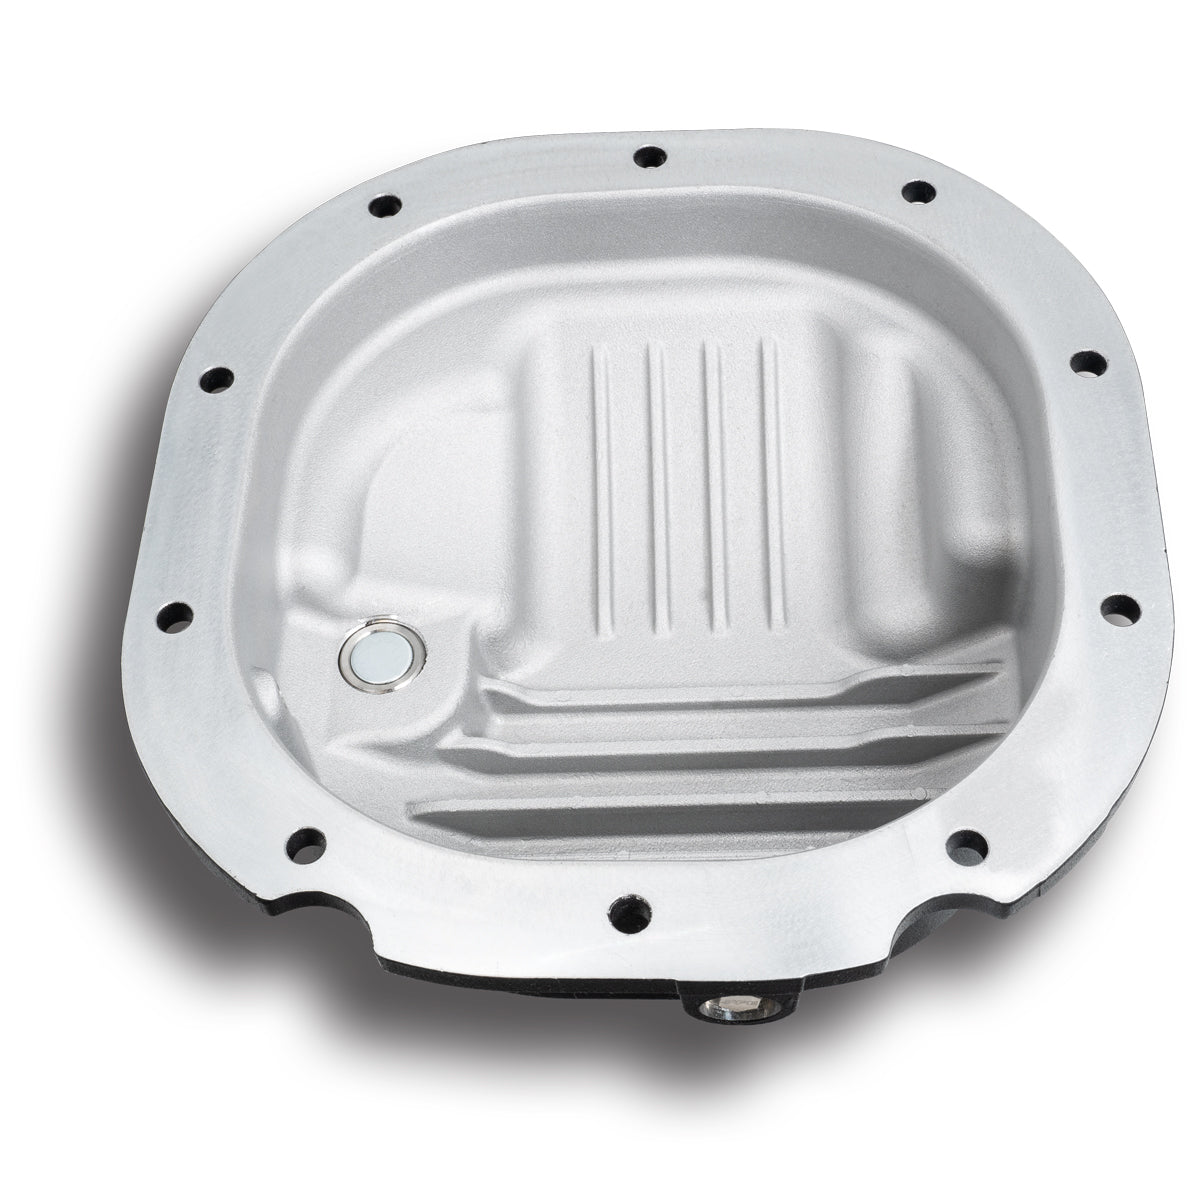 1990-2014 Ford F150/SUV 8.8"-10 Heavy-Duty Cast Aluminum Rear Differential Cover ppepower